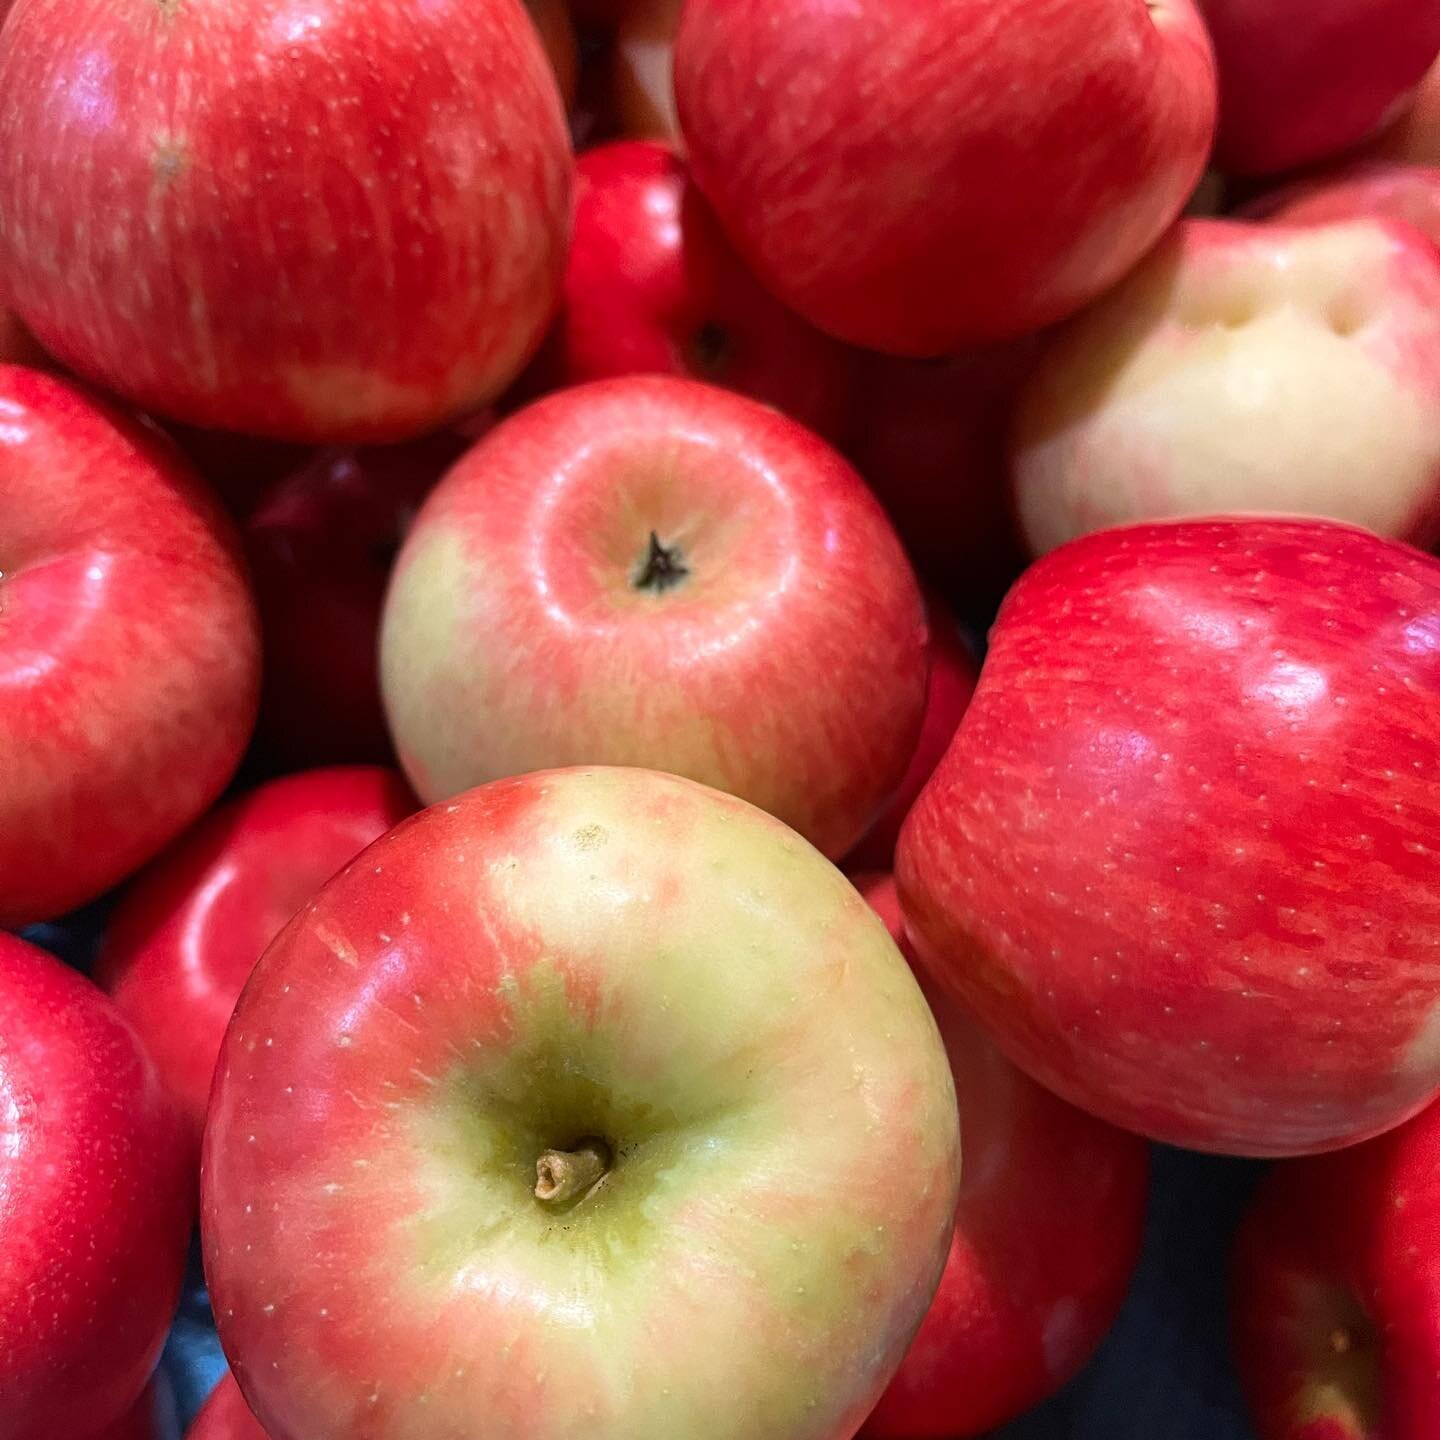 Wow!  The honey crisp apples are beautiful this year, and dahlias and other flowers are still blooming.  Stop by the farm and pick up some fresh apples or try some of our popular apple chips.  Maybe even pick up a bouquet for someone special 💕. Open